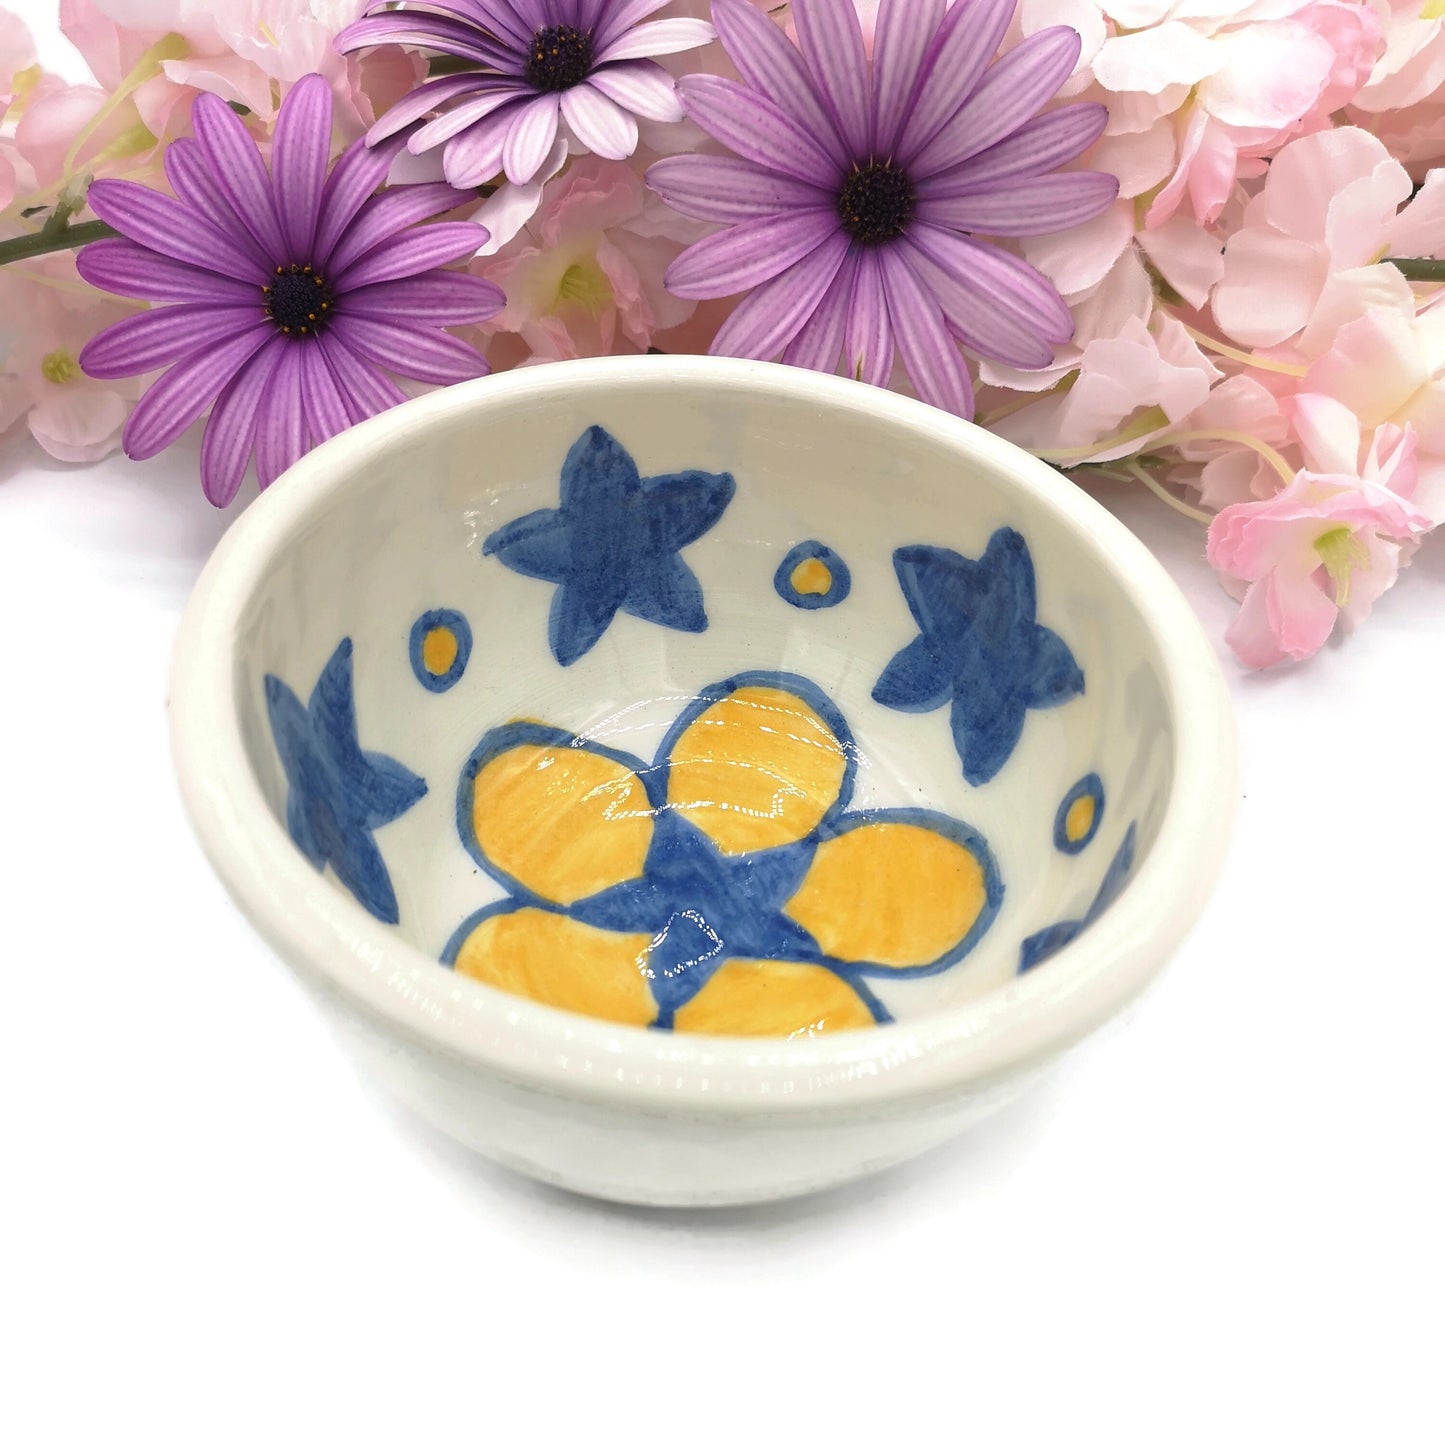 Decorative Ceramic Bowl, Handmade Pottery Mothers Day Gift For Grandma, Housewarming Gift For Women, Mom Birthday Gift From Daughter Best - Ceramica Ana Rafael